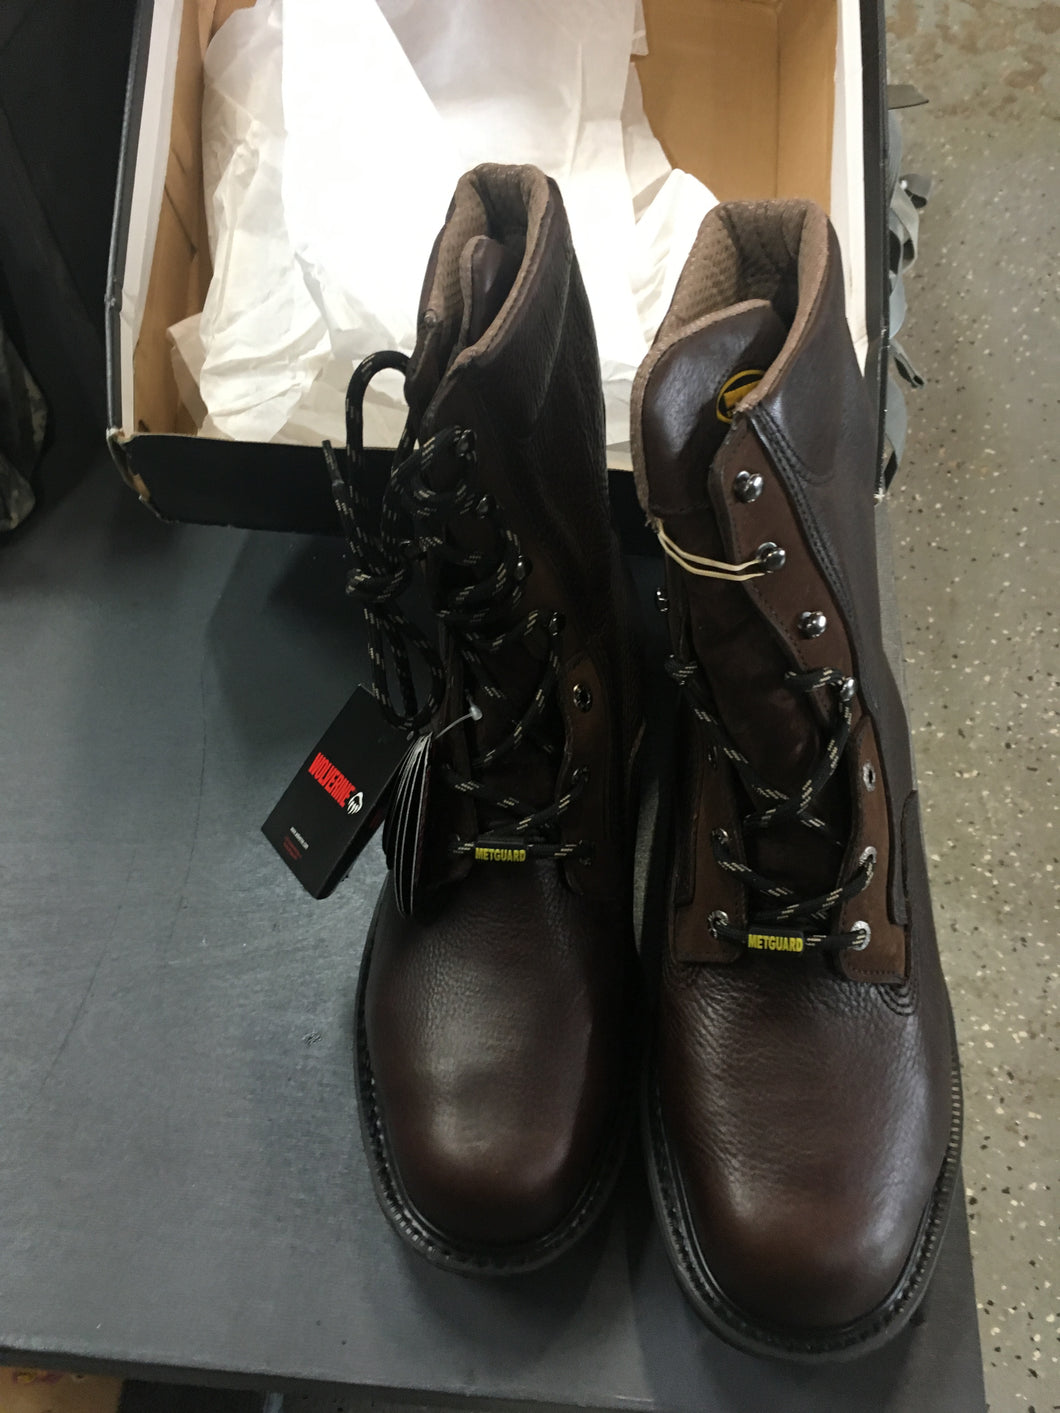 Pair of Wolverine boots in front of boot box